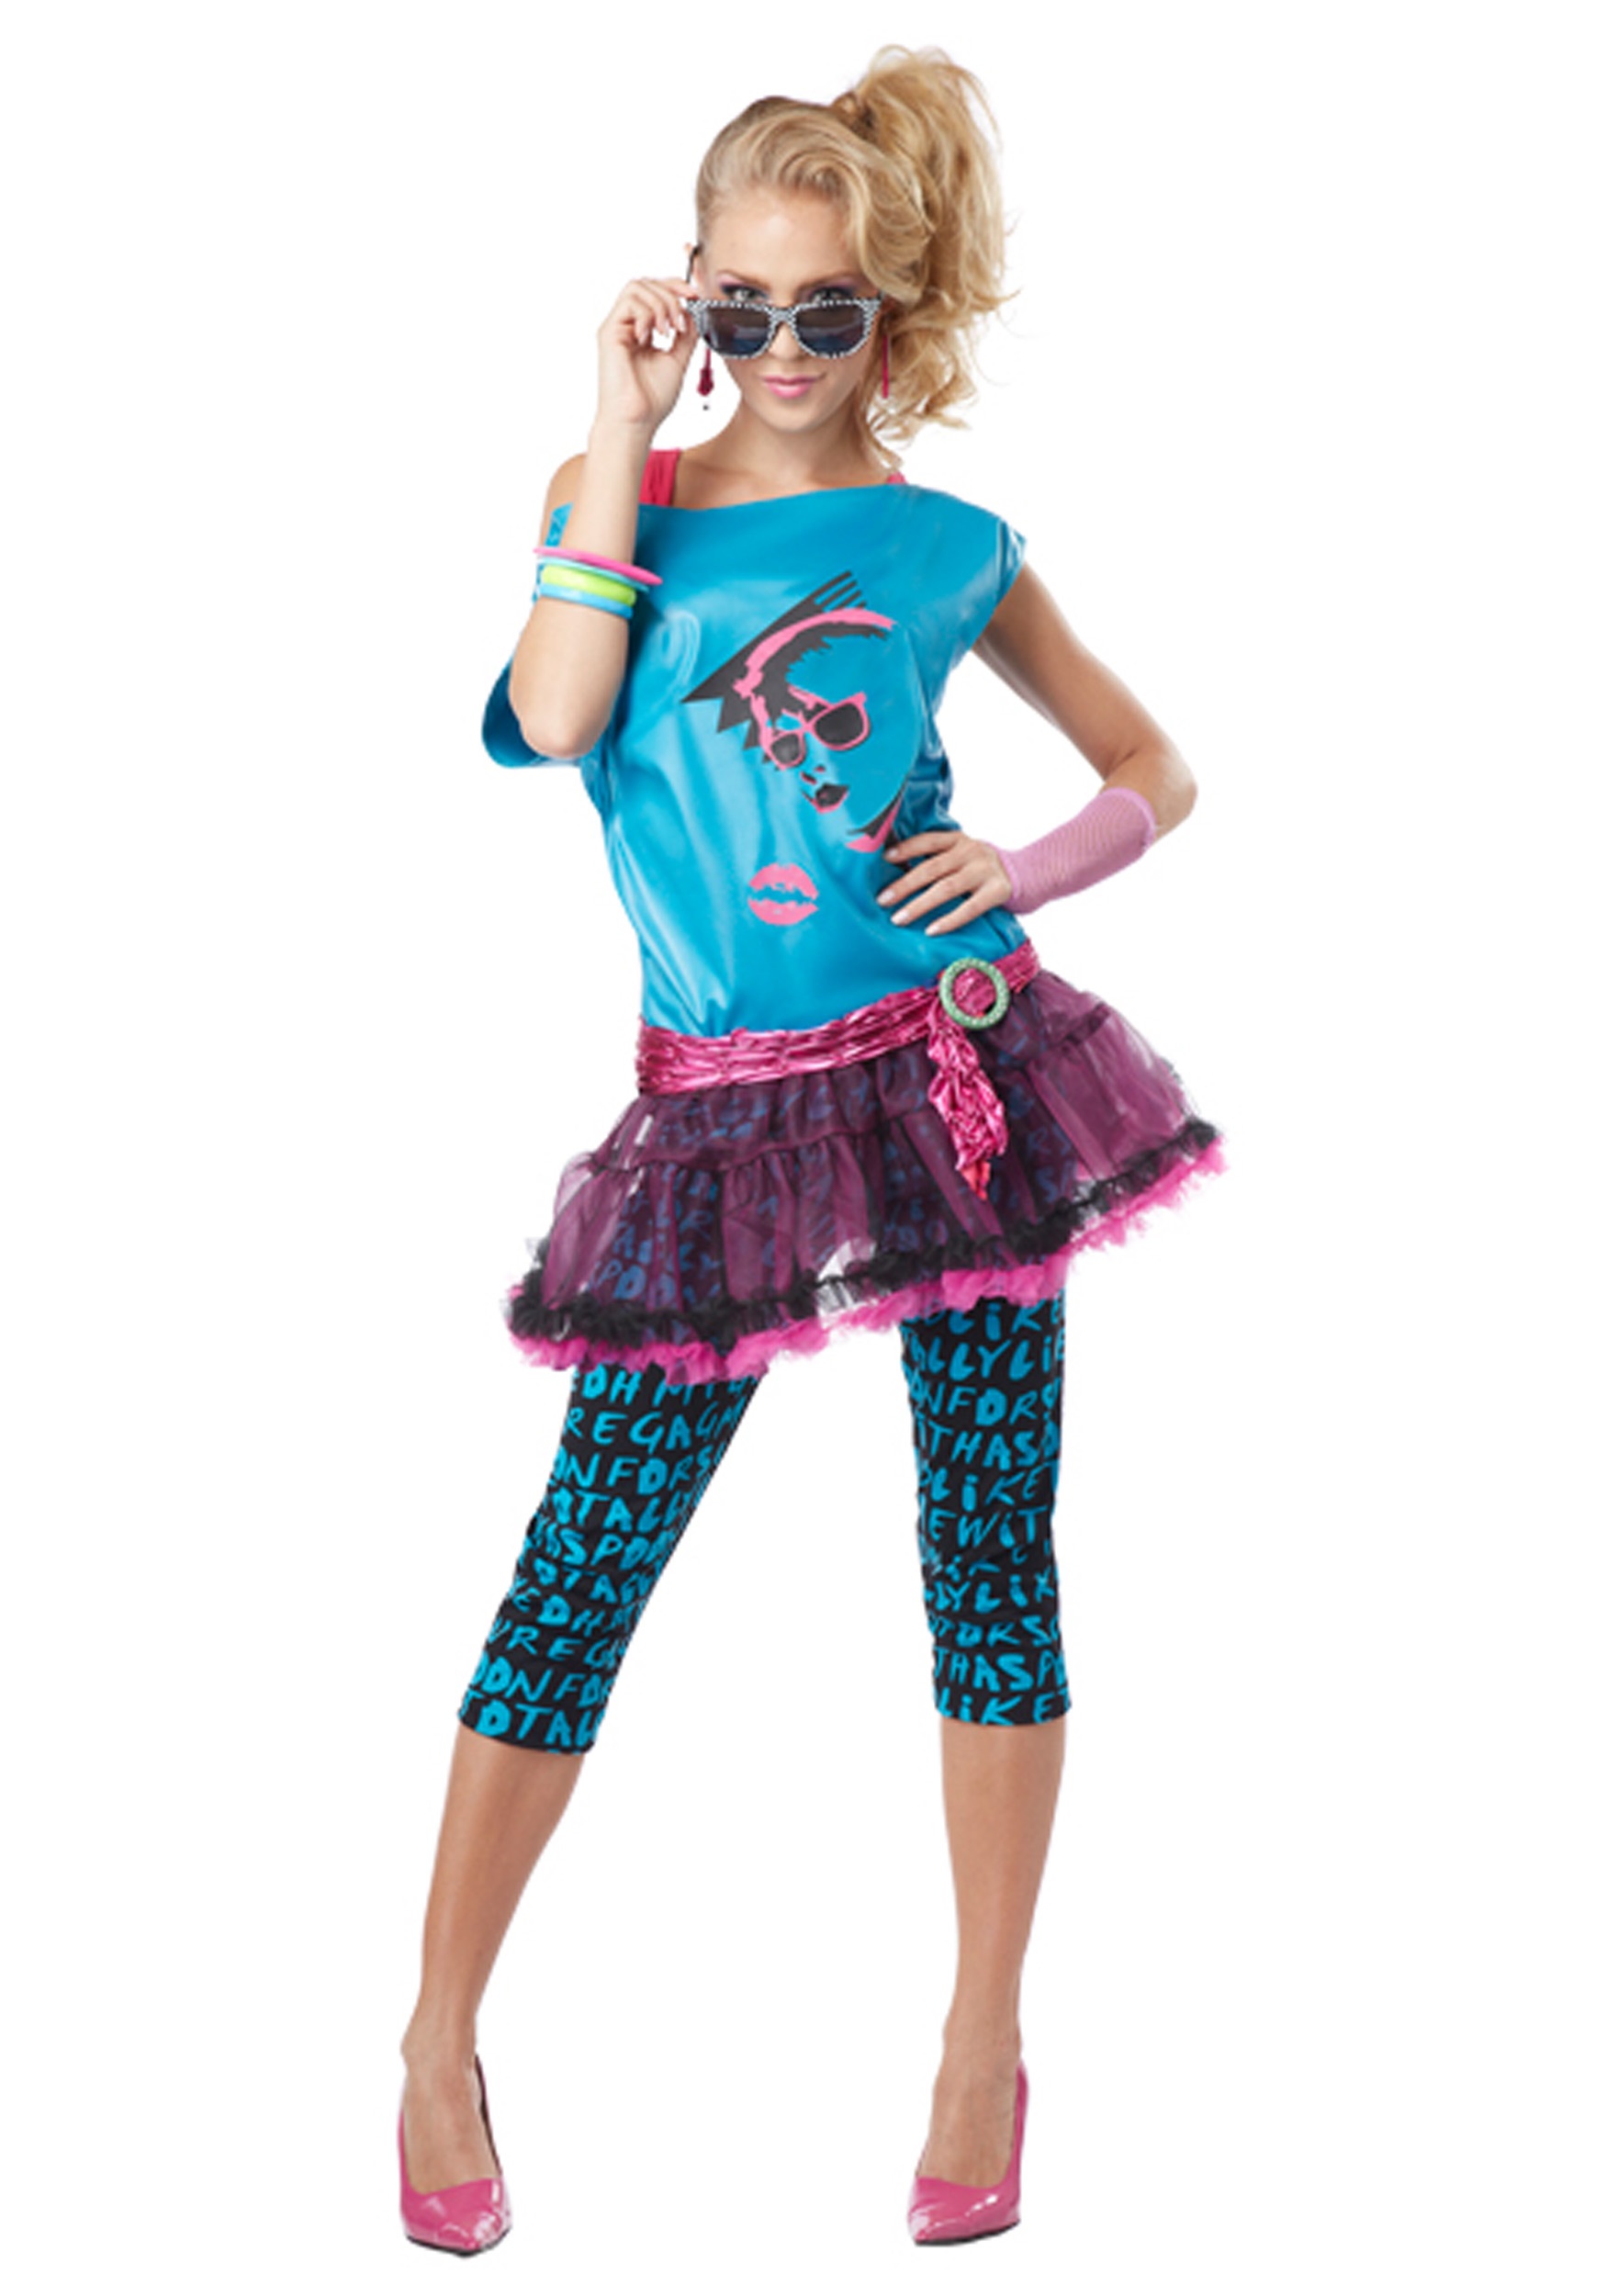 https://images.fun.com.au/products/15375/1-1/totally-rad-valley-girl-costume.jpg